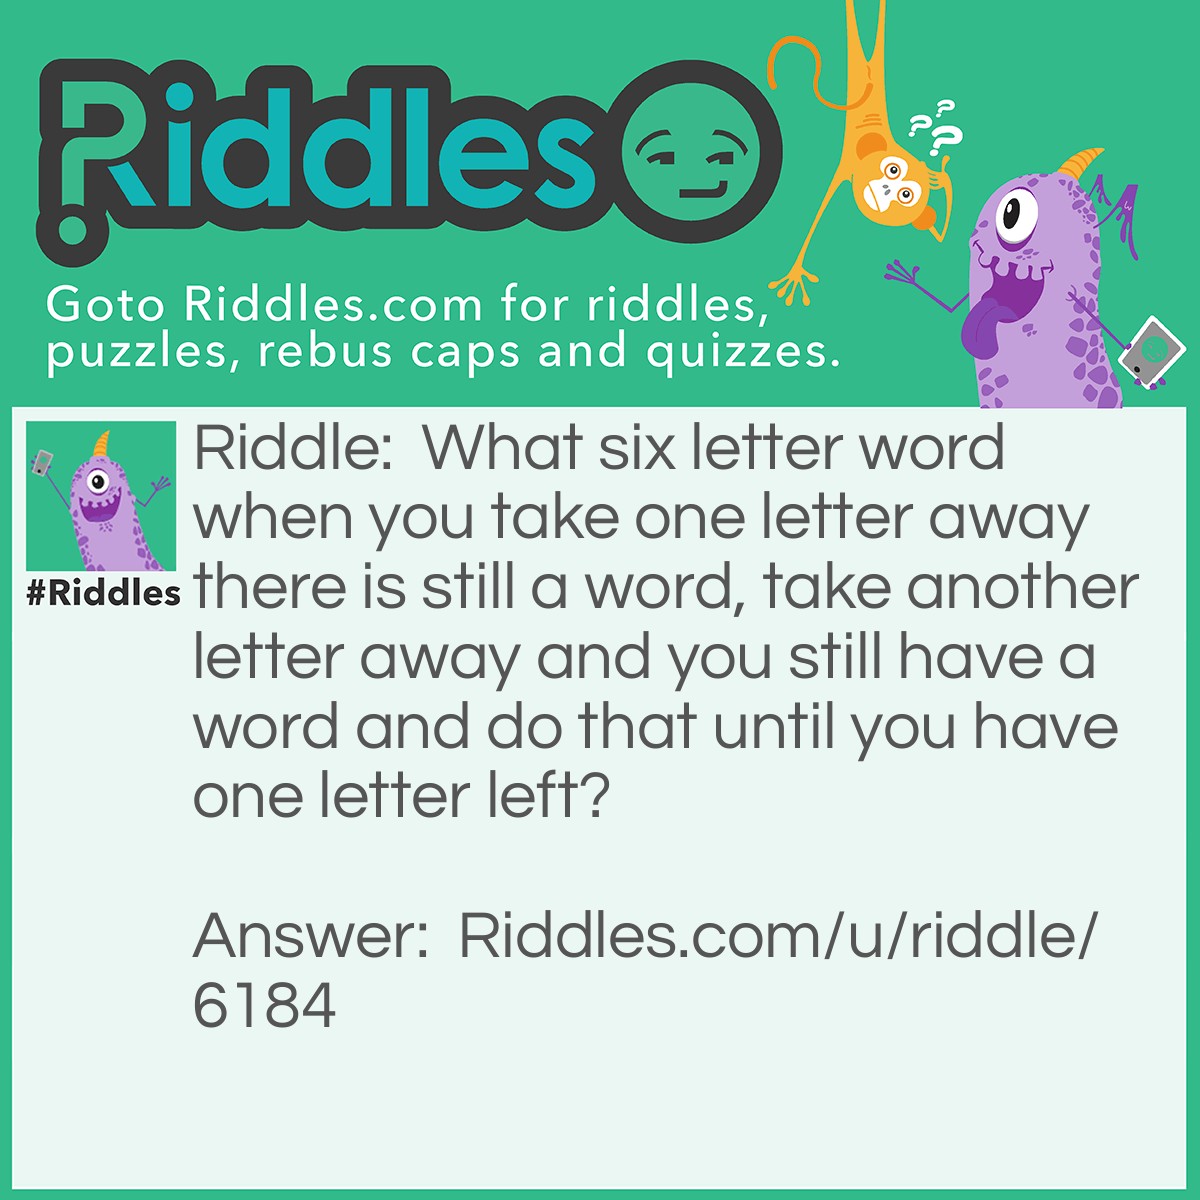 Riddle: What six letter word when you take one letter away there is still a word, take another letter away and you still have a word and do that until you have one letter left? Answer: Estate. Estate, state, stat, sat, at, and a.